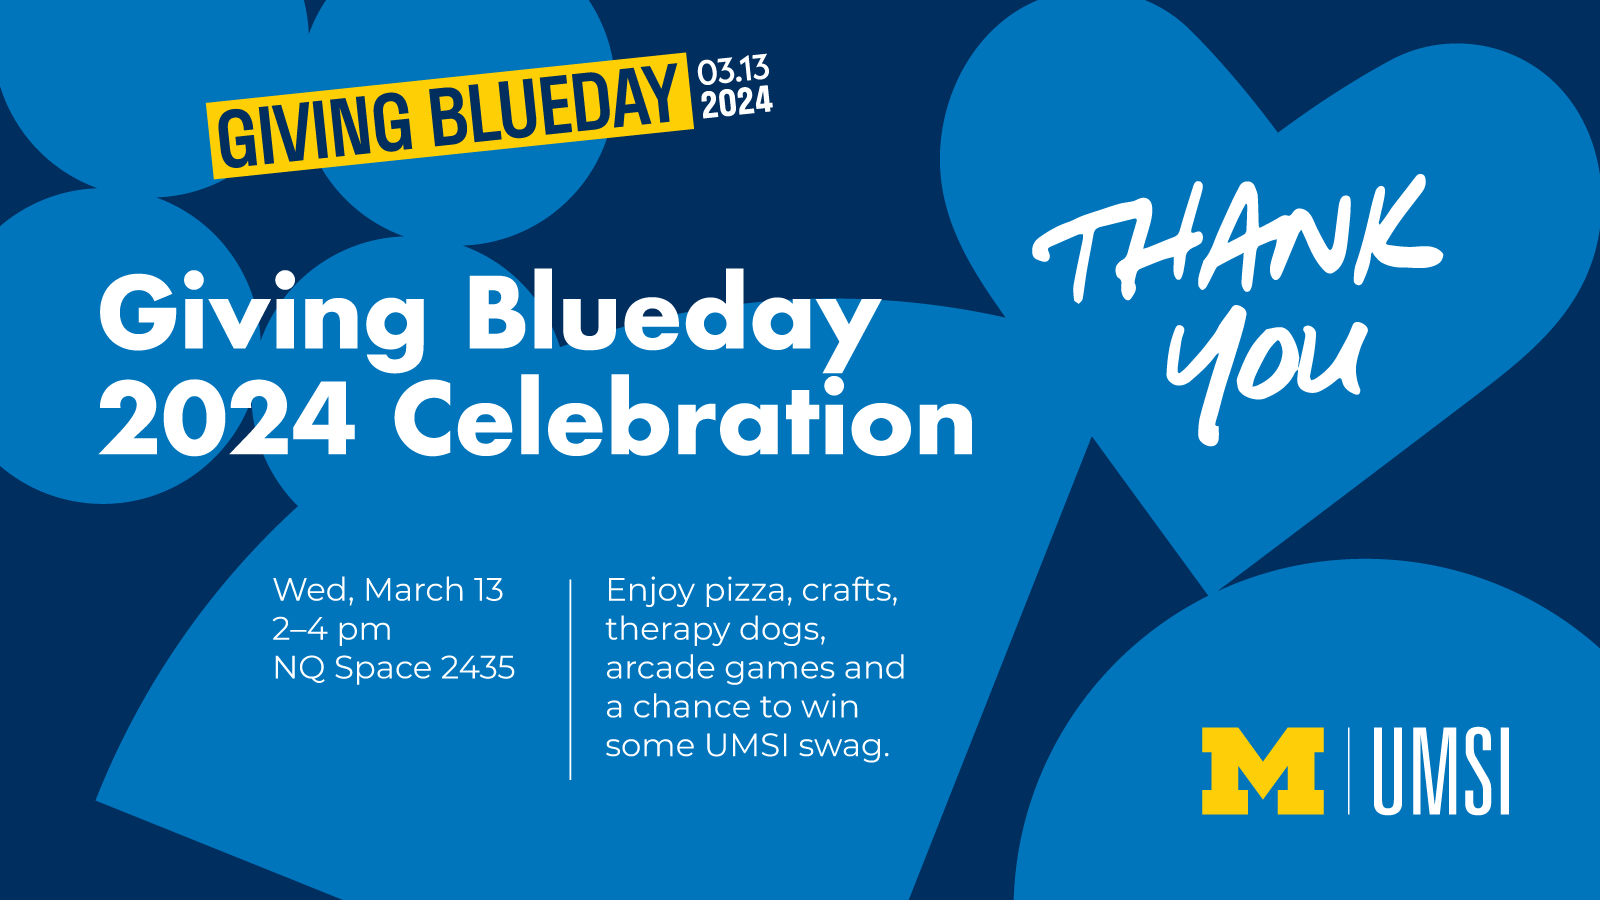 A graphic with the text "Giving Blueday: 03.13.2024: Giving Blueday 2024 Celebration: Wed, March 13, 2-4 p.m., NQ Space 2435" and the UMSI logo